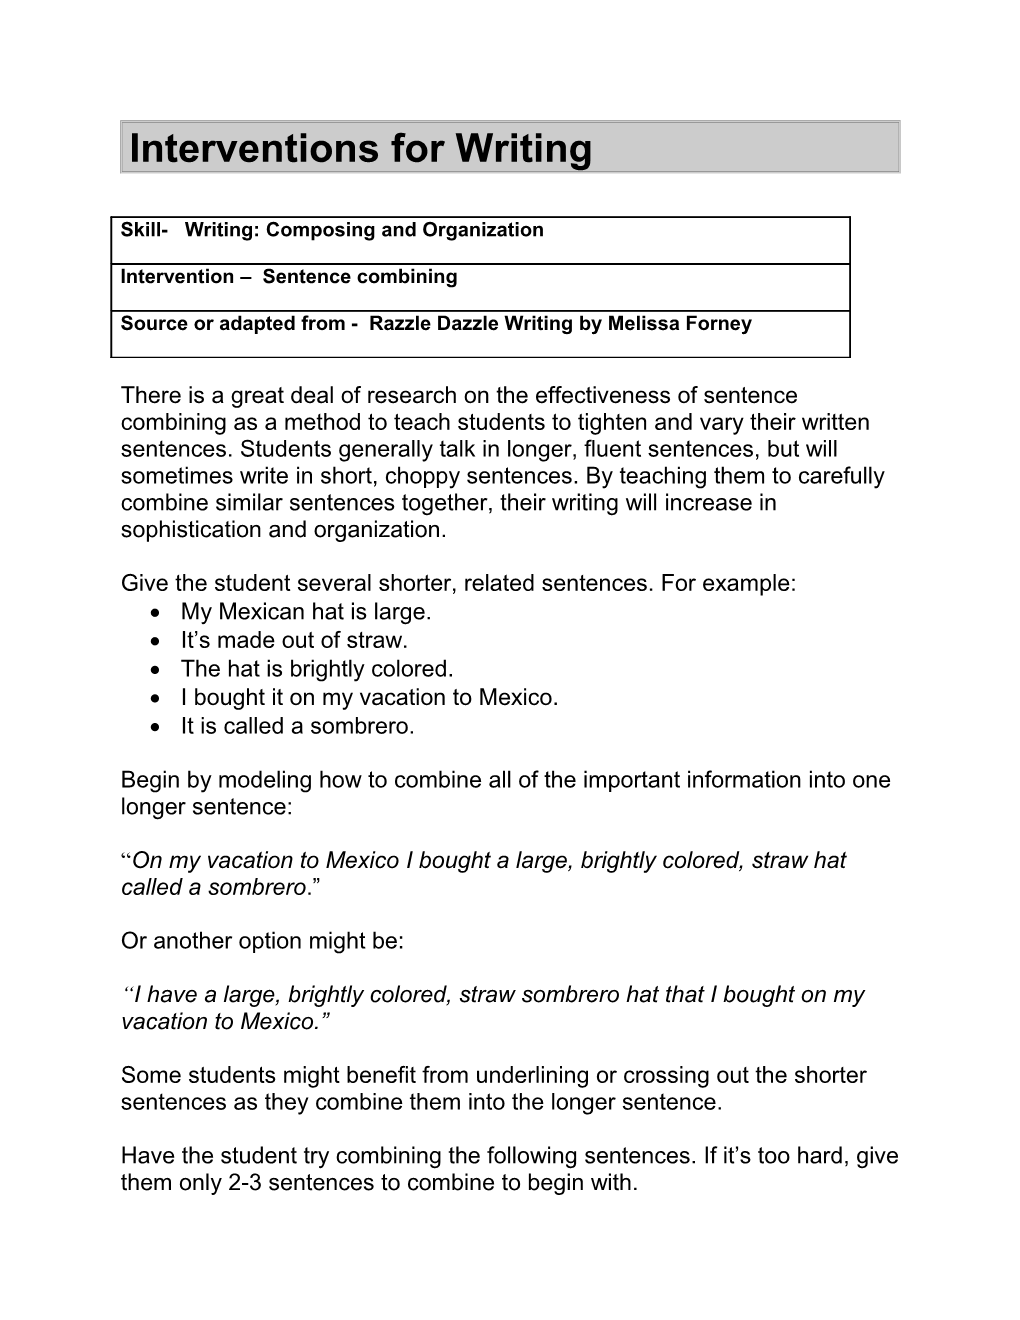 Interventions for Writing